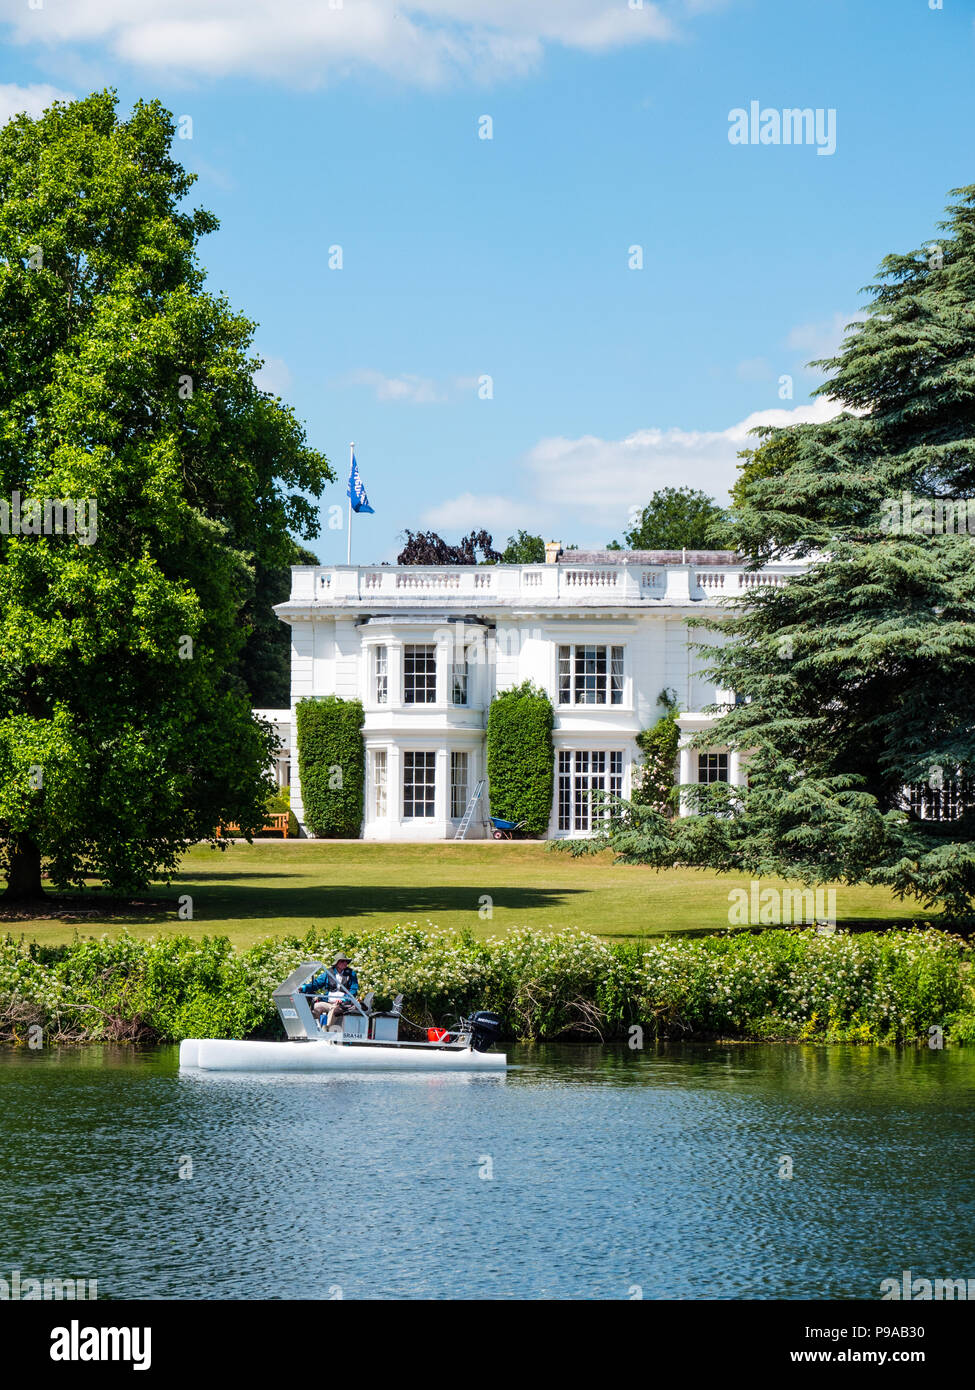 Henley Business School, Greenlands Campus, Henley on Thames, Oxfordshire, England, UK, GB. Stockfoto